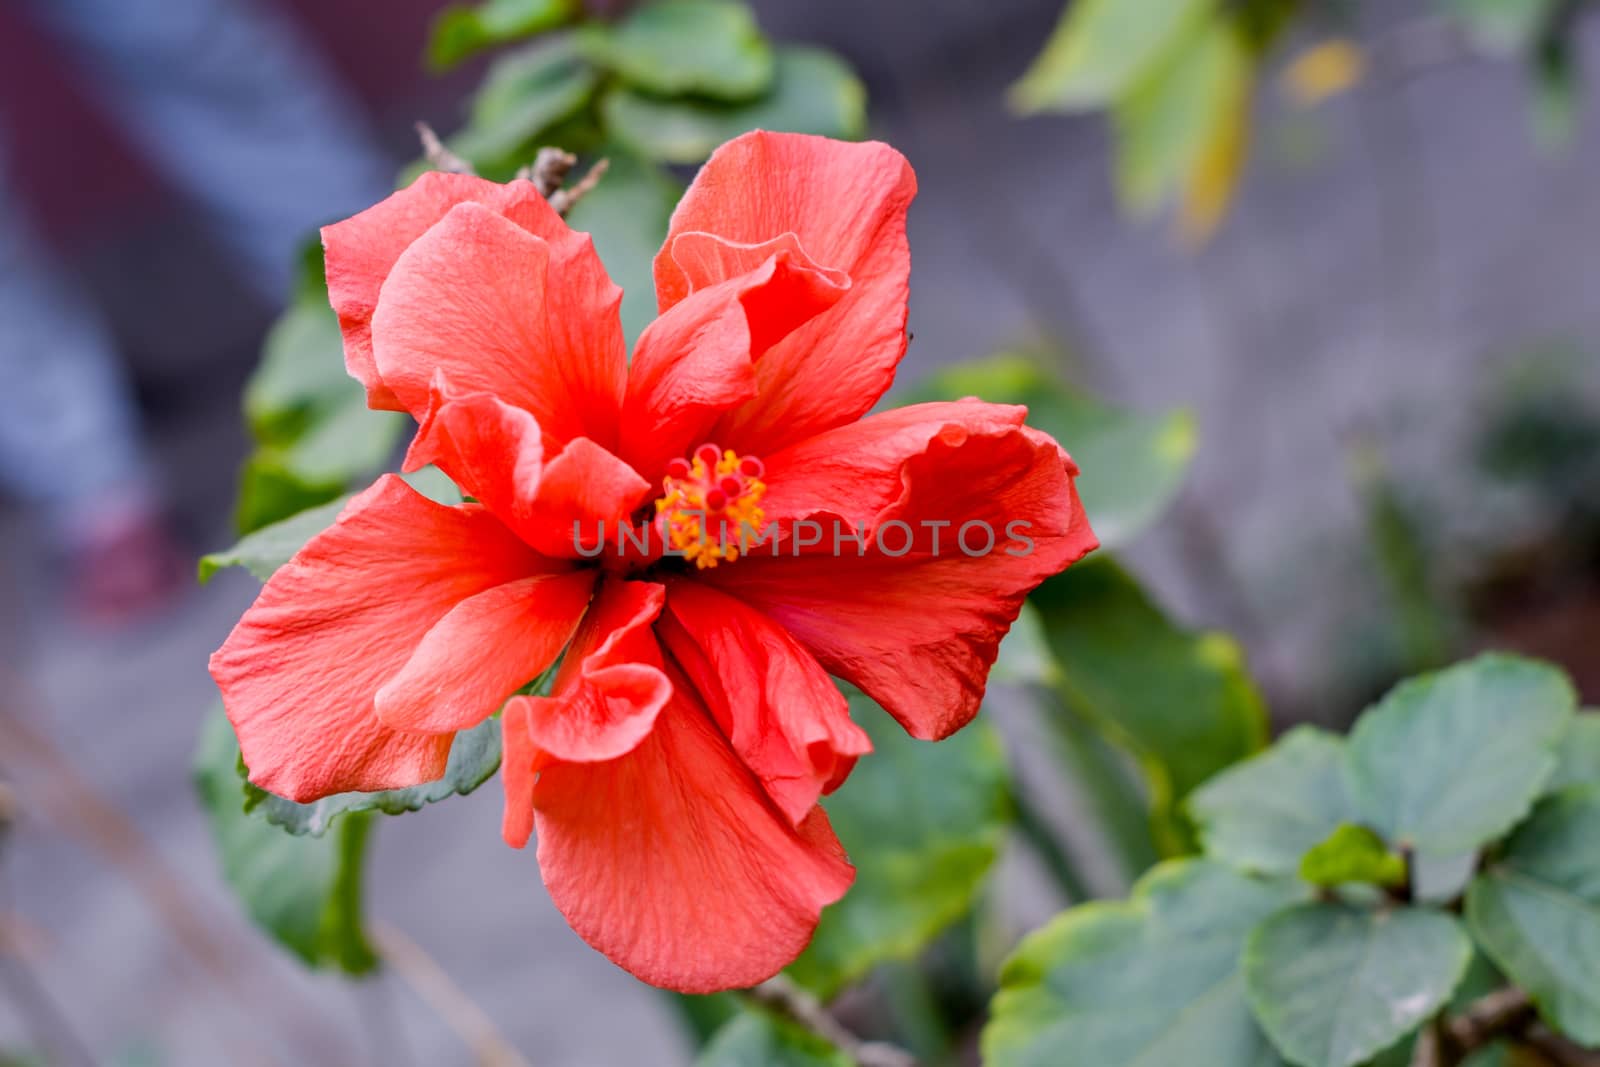 One Chaba flower (Hibiscus rosa-sinensis) chinese rose, red color, blooming during morning sunlight. in tropical garden in green background. With copy space room for text on right side of the image. by sudiptabhowmick